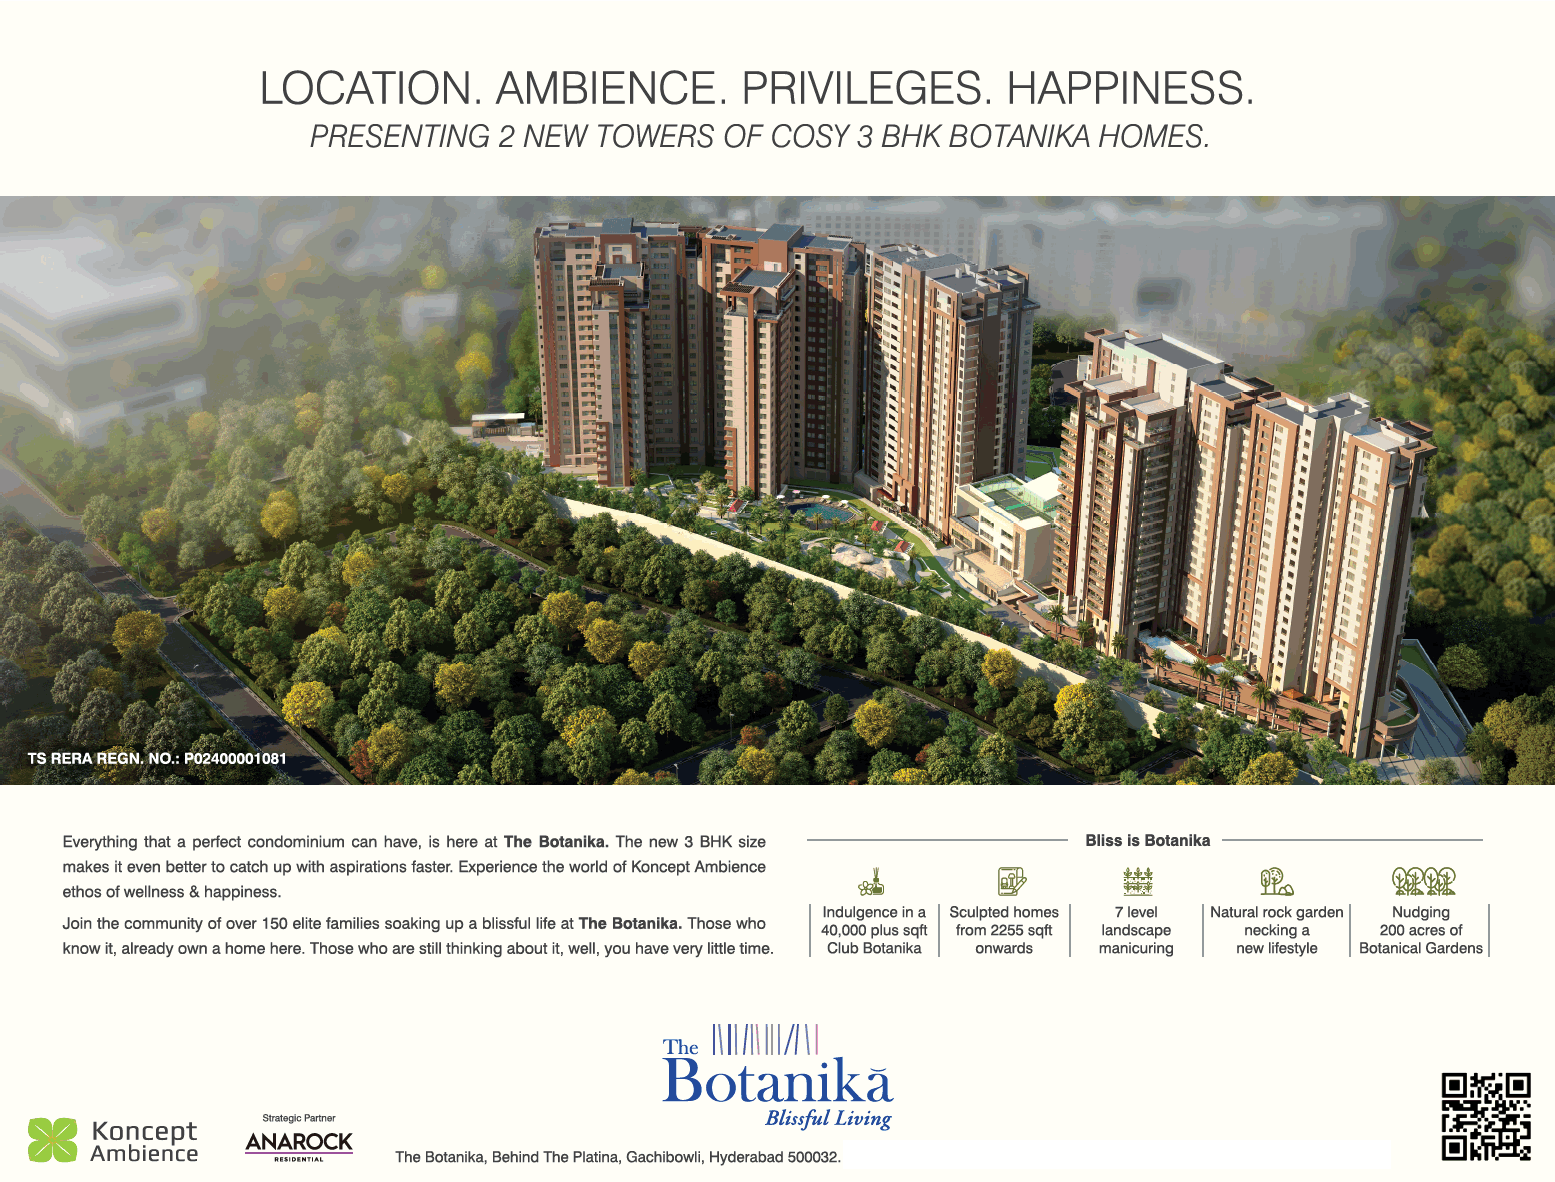 Presenting 2 new towers of cosy 3 BHK Botanika homes in Hyderabad Update